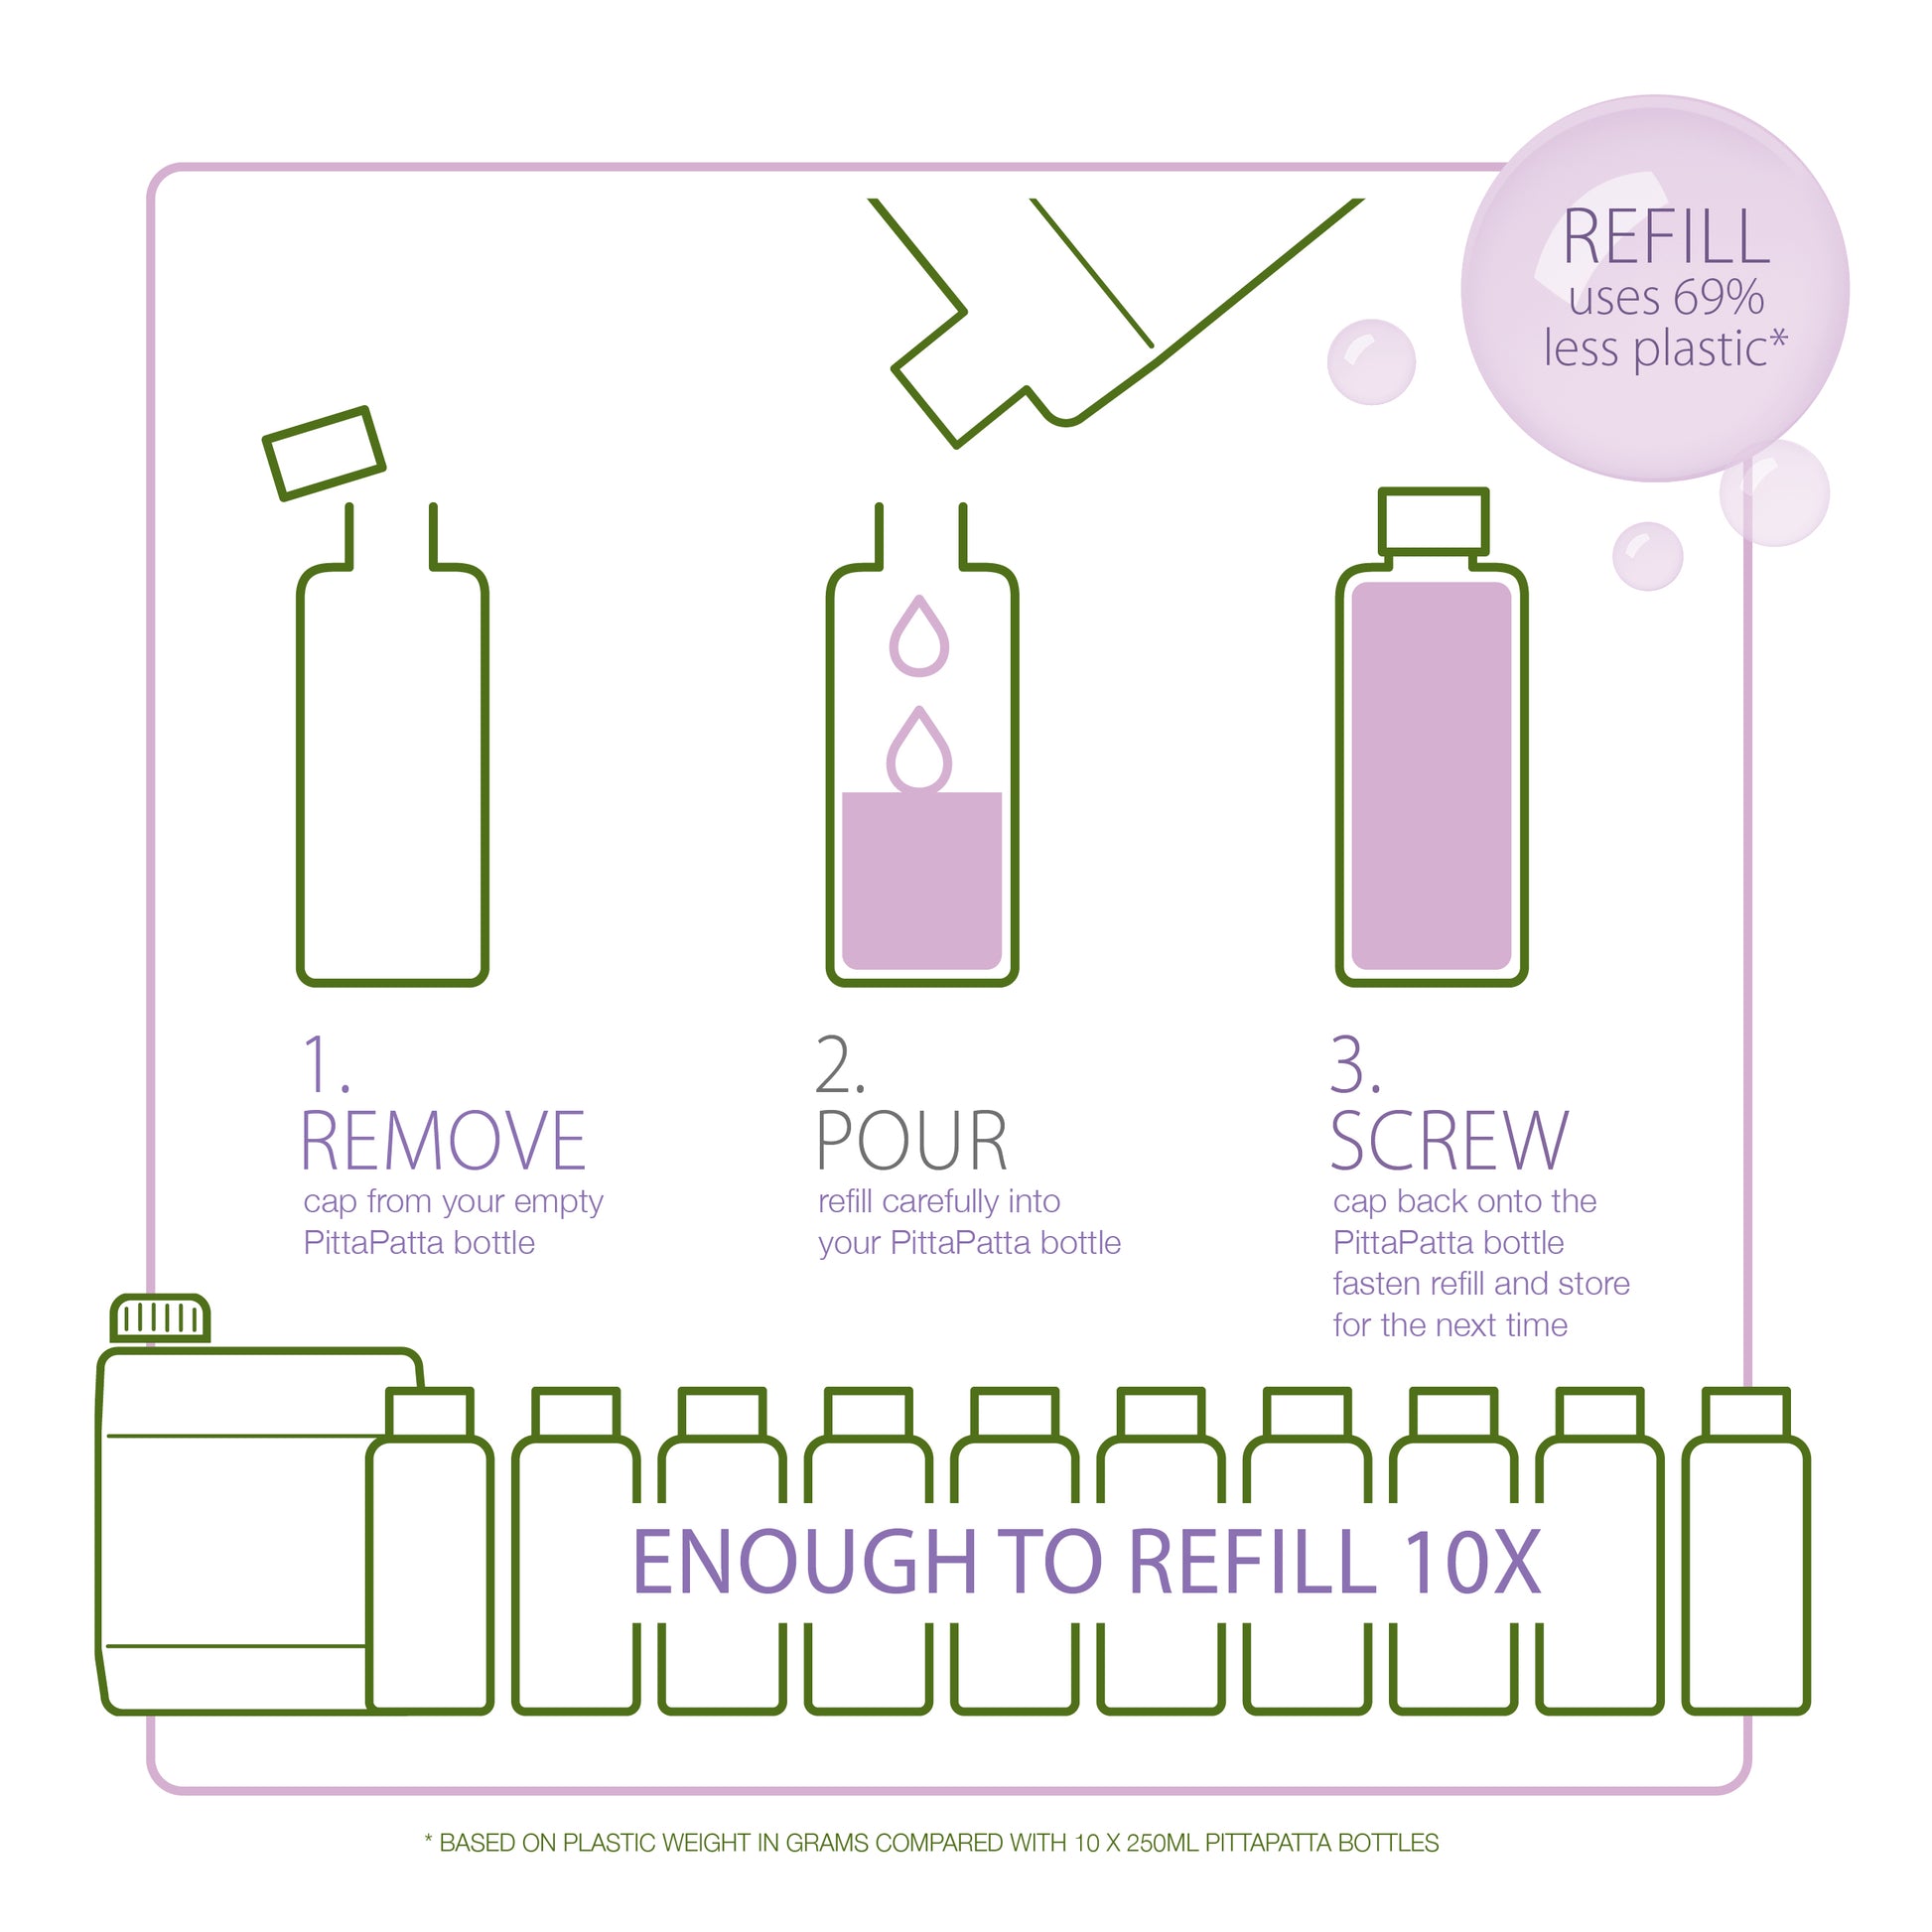 Reuse and refill, enough for x10 Pittapatta bottles, never run out of your favourite product with our 2.5Lt refill. Uses 69% less plastic* * Based on plastic weight in grams compared with 10 x 250ml Pittapatta bottles